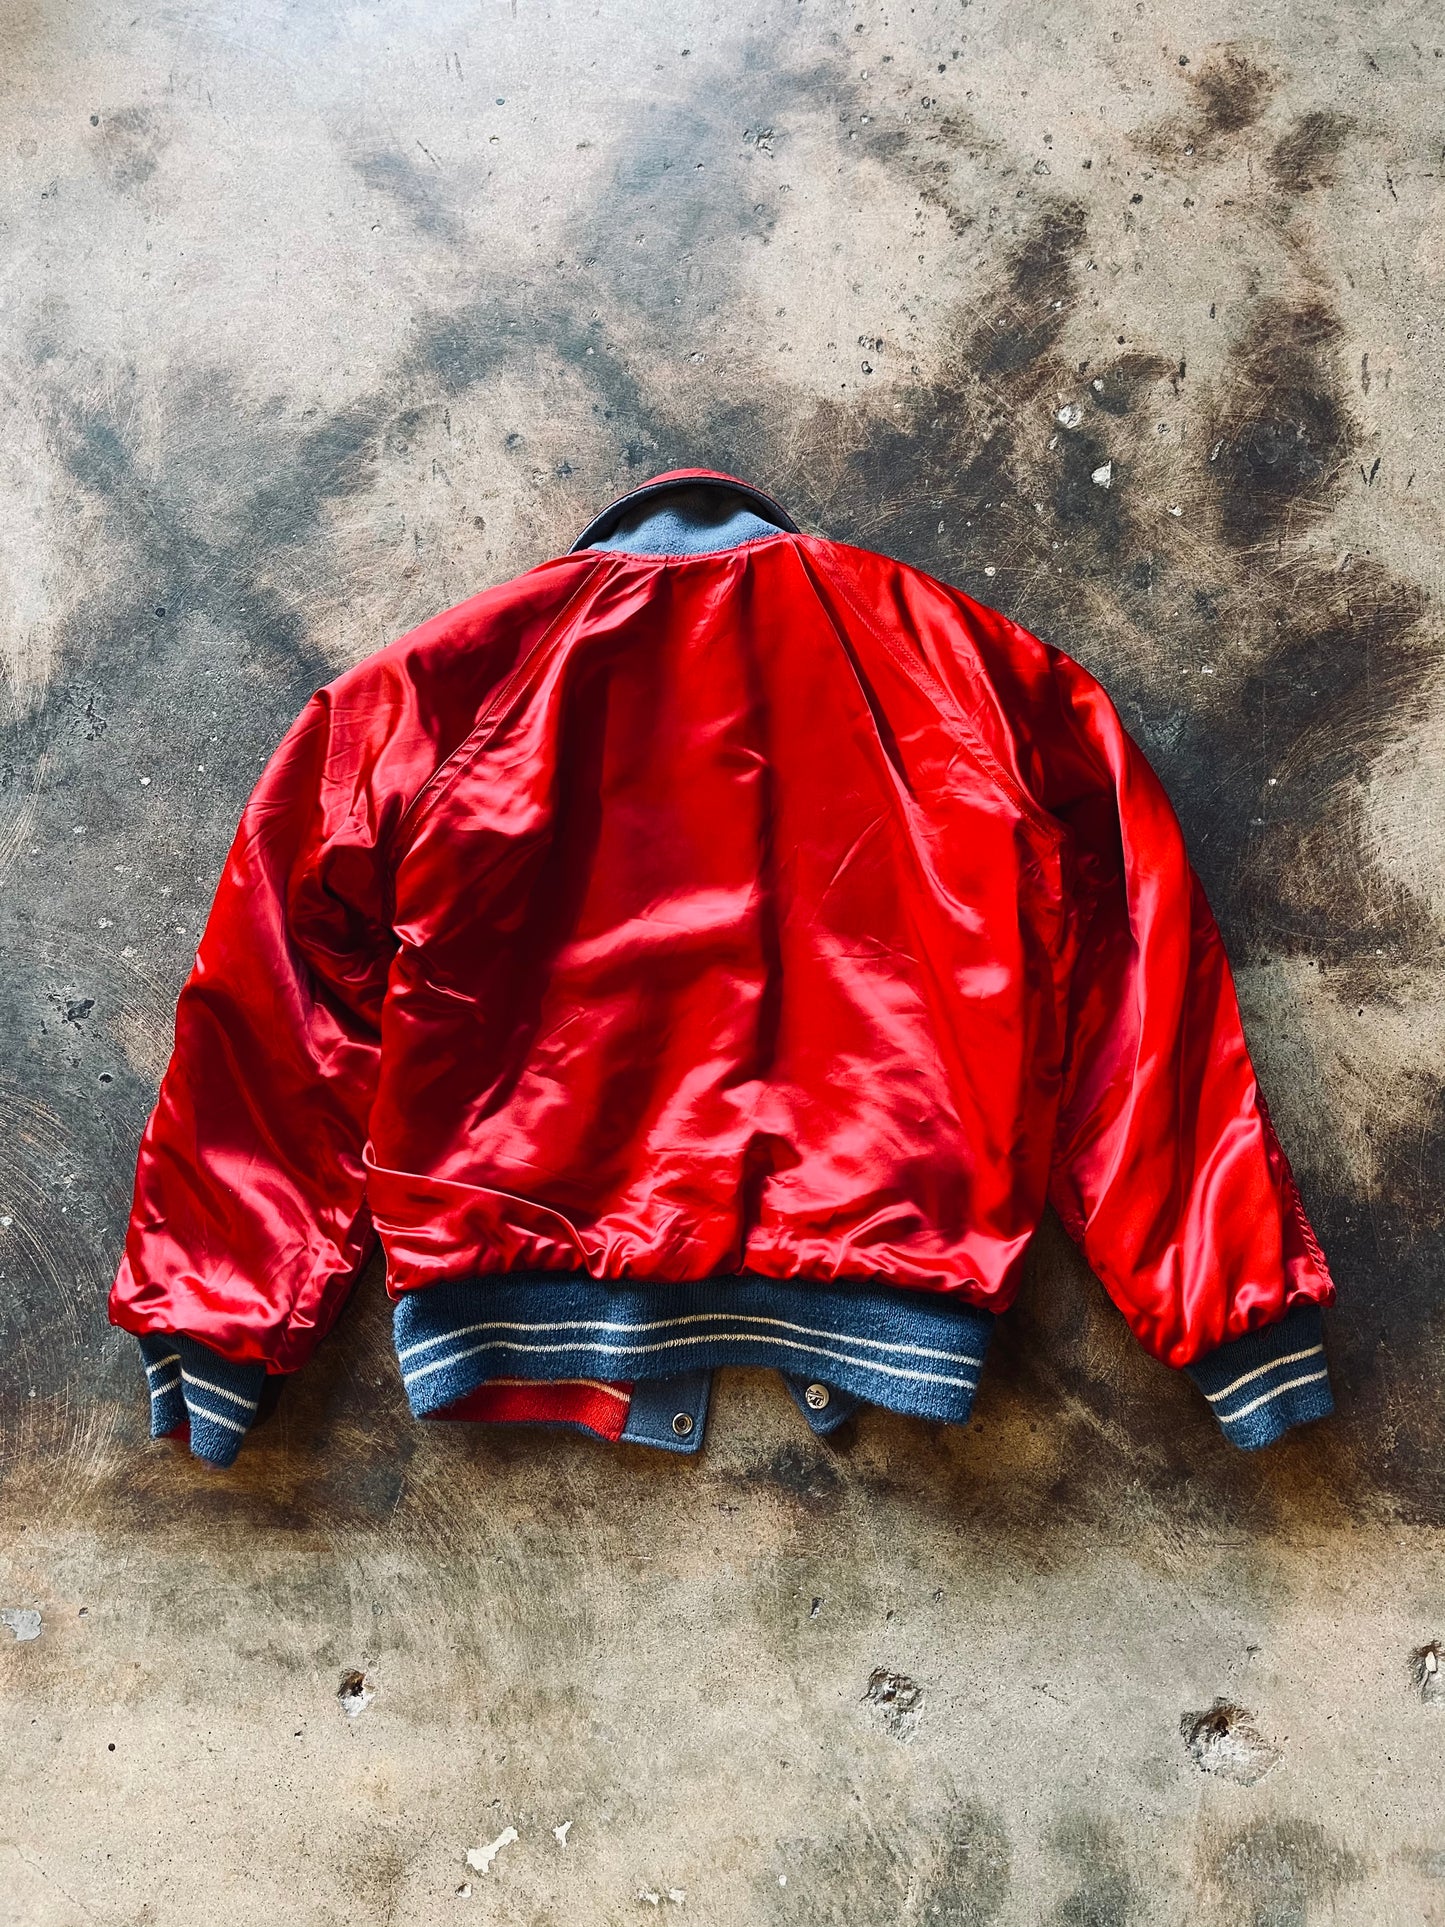 Late 60’s Reversible Letterman Jacket “Barb McIntire” | 40